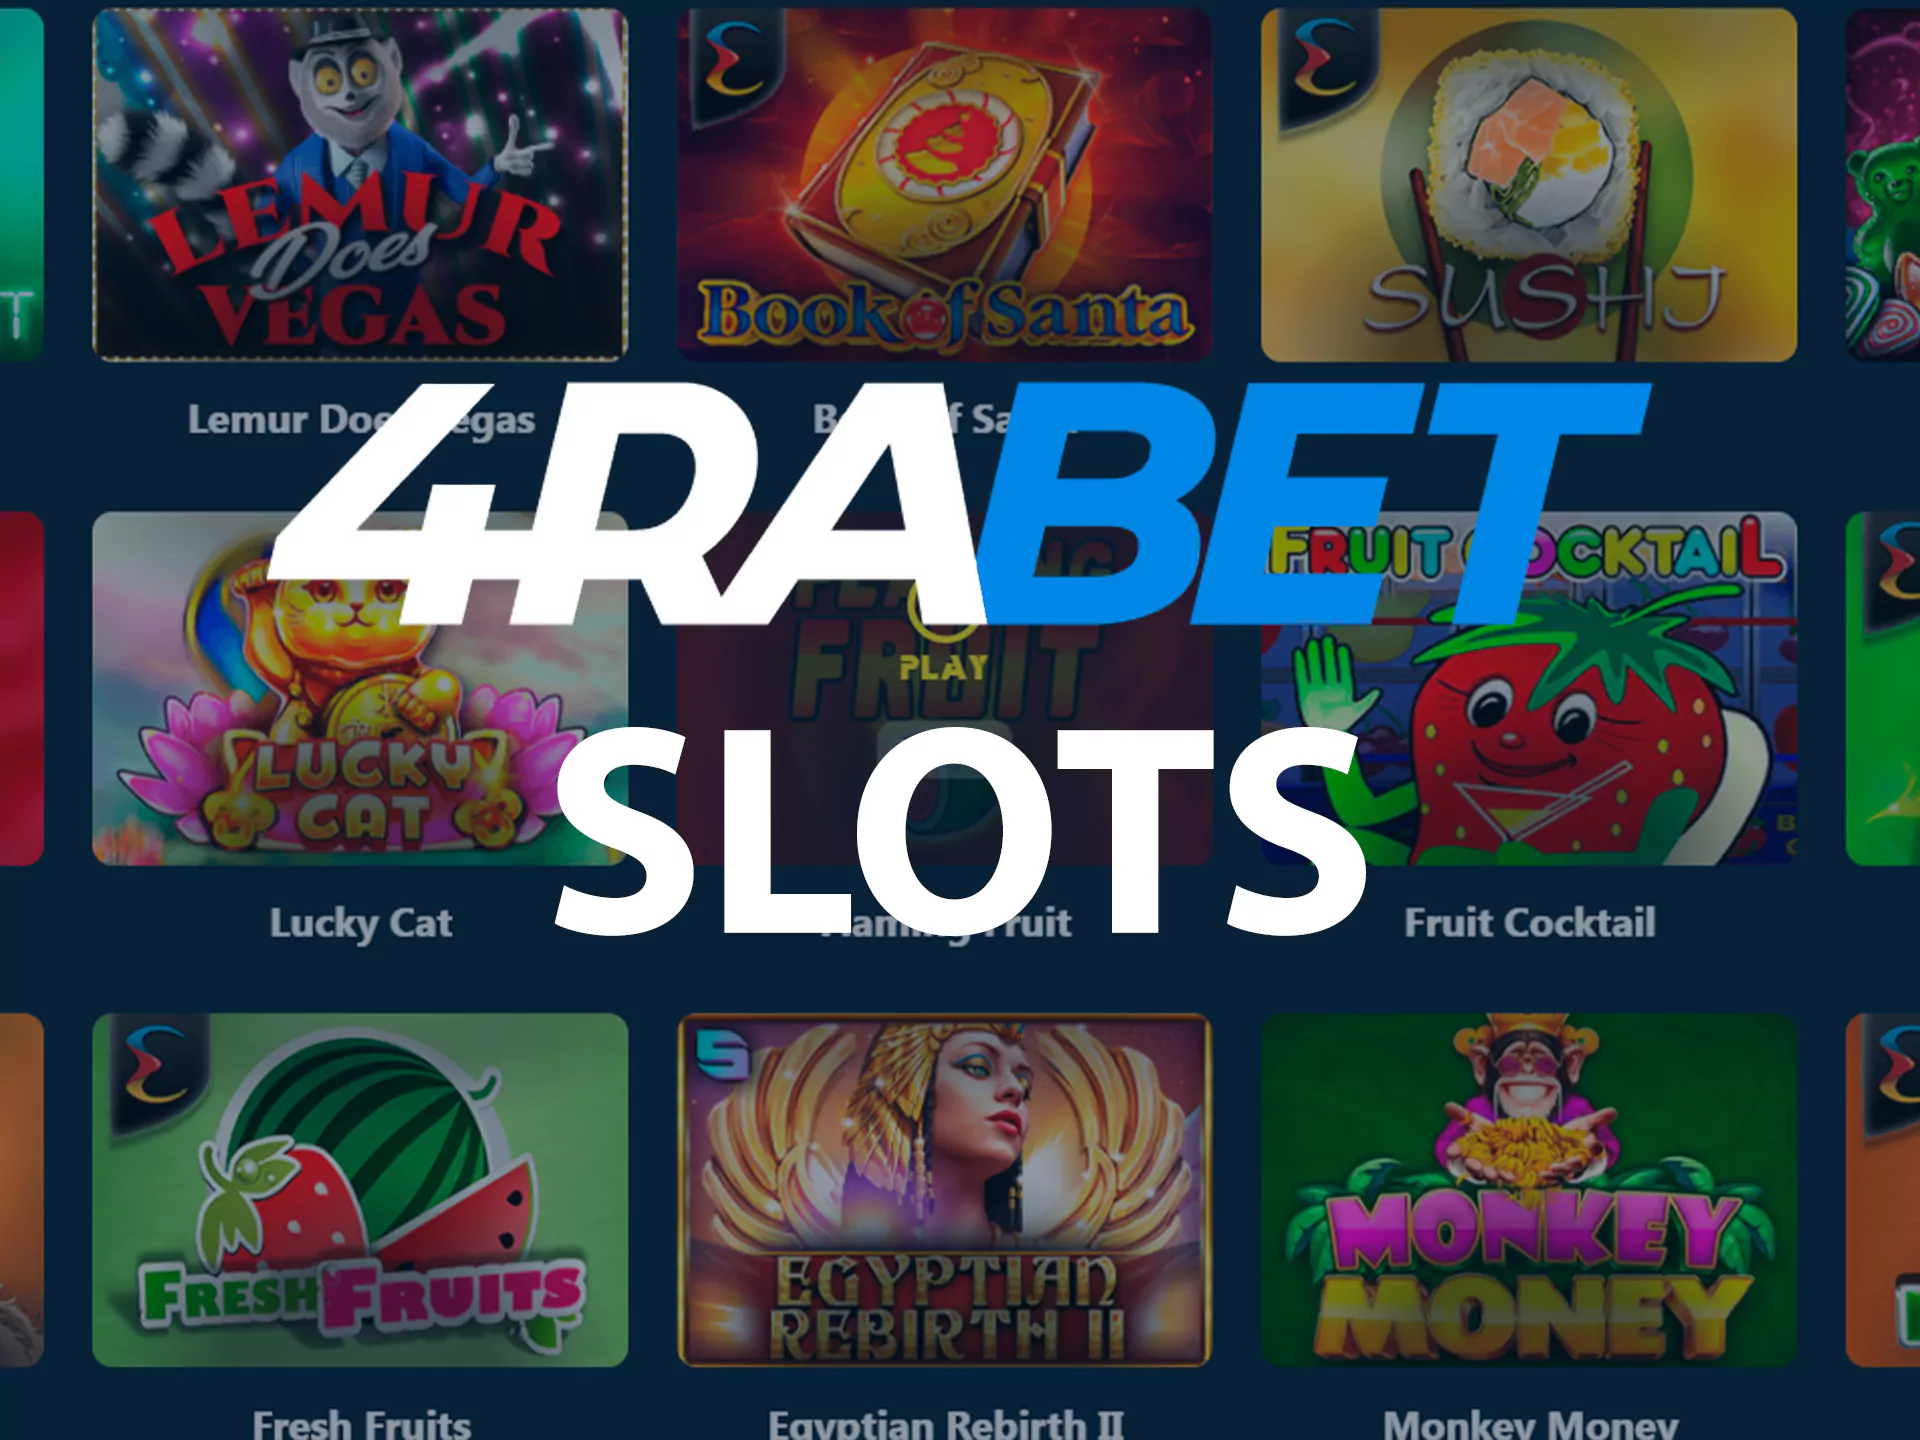 Play slots from the most tustworthy developers.